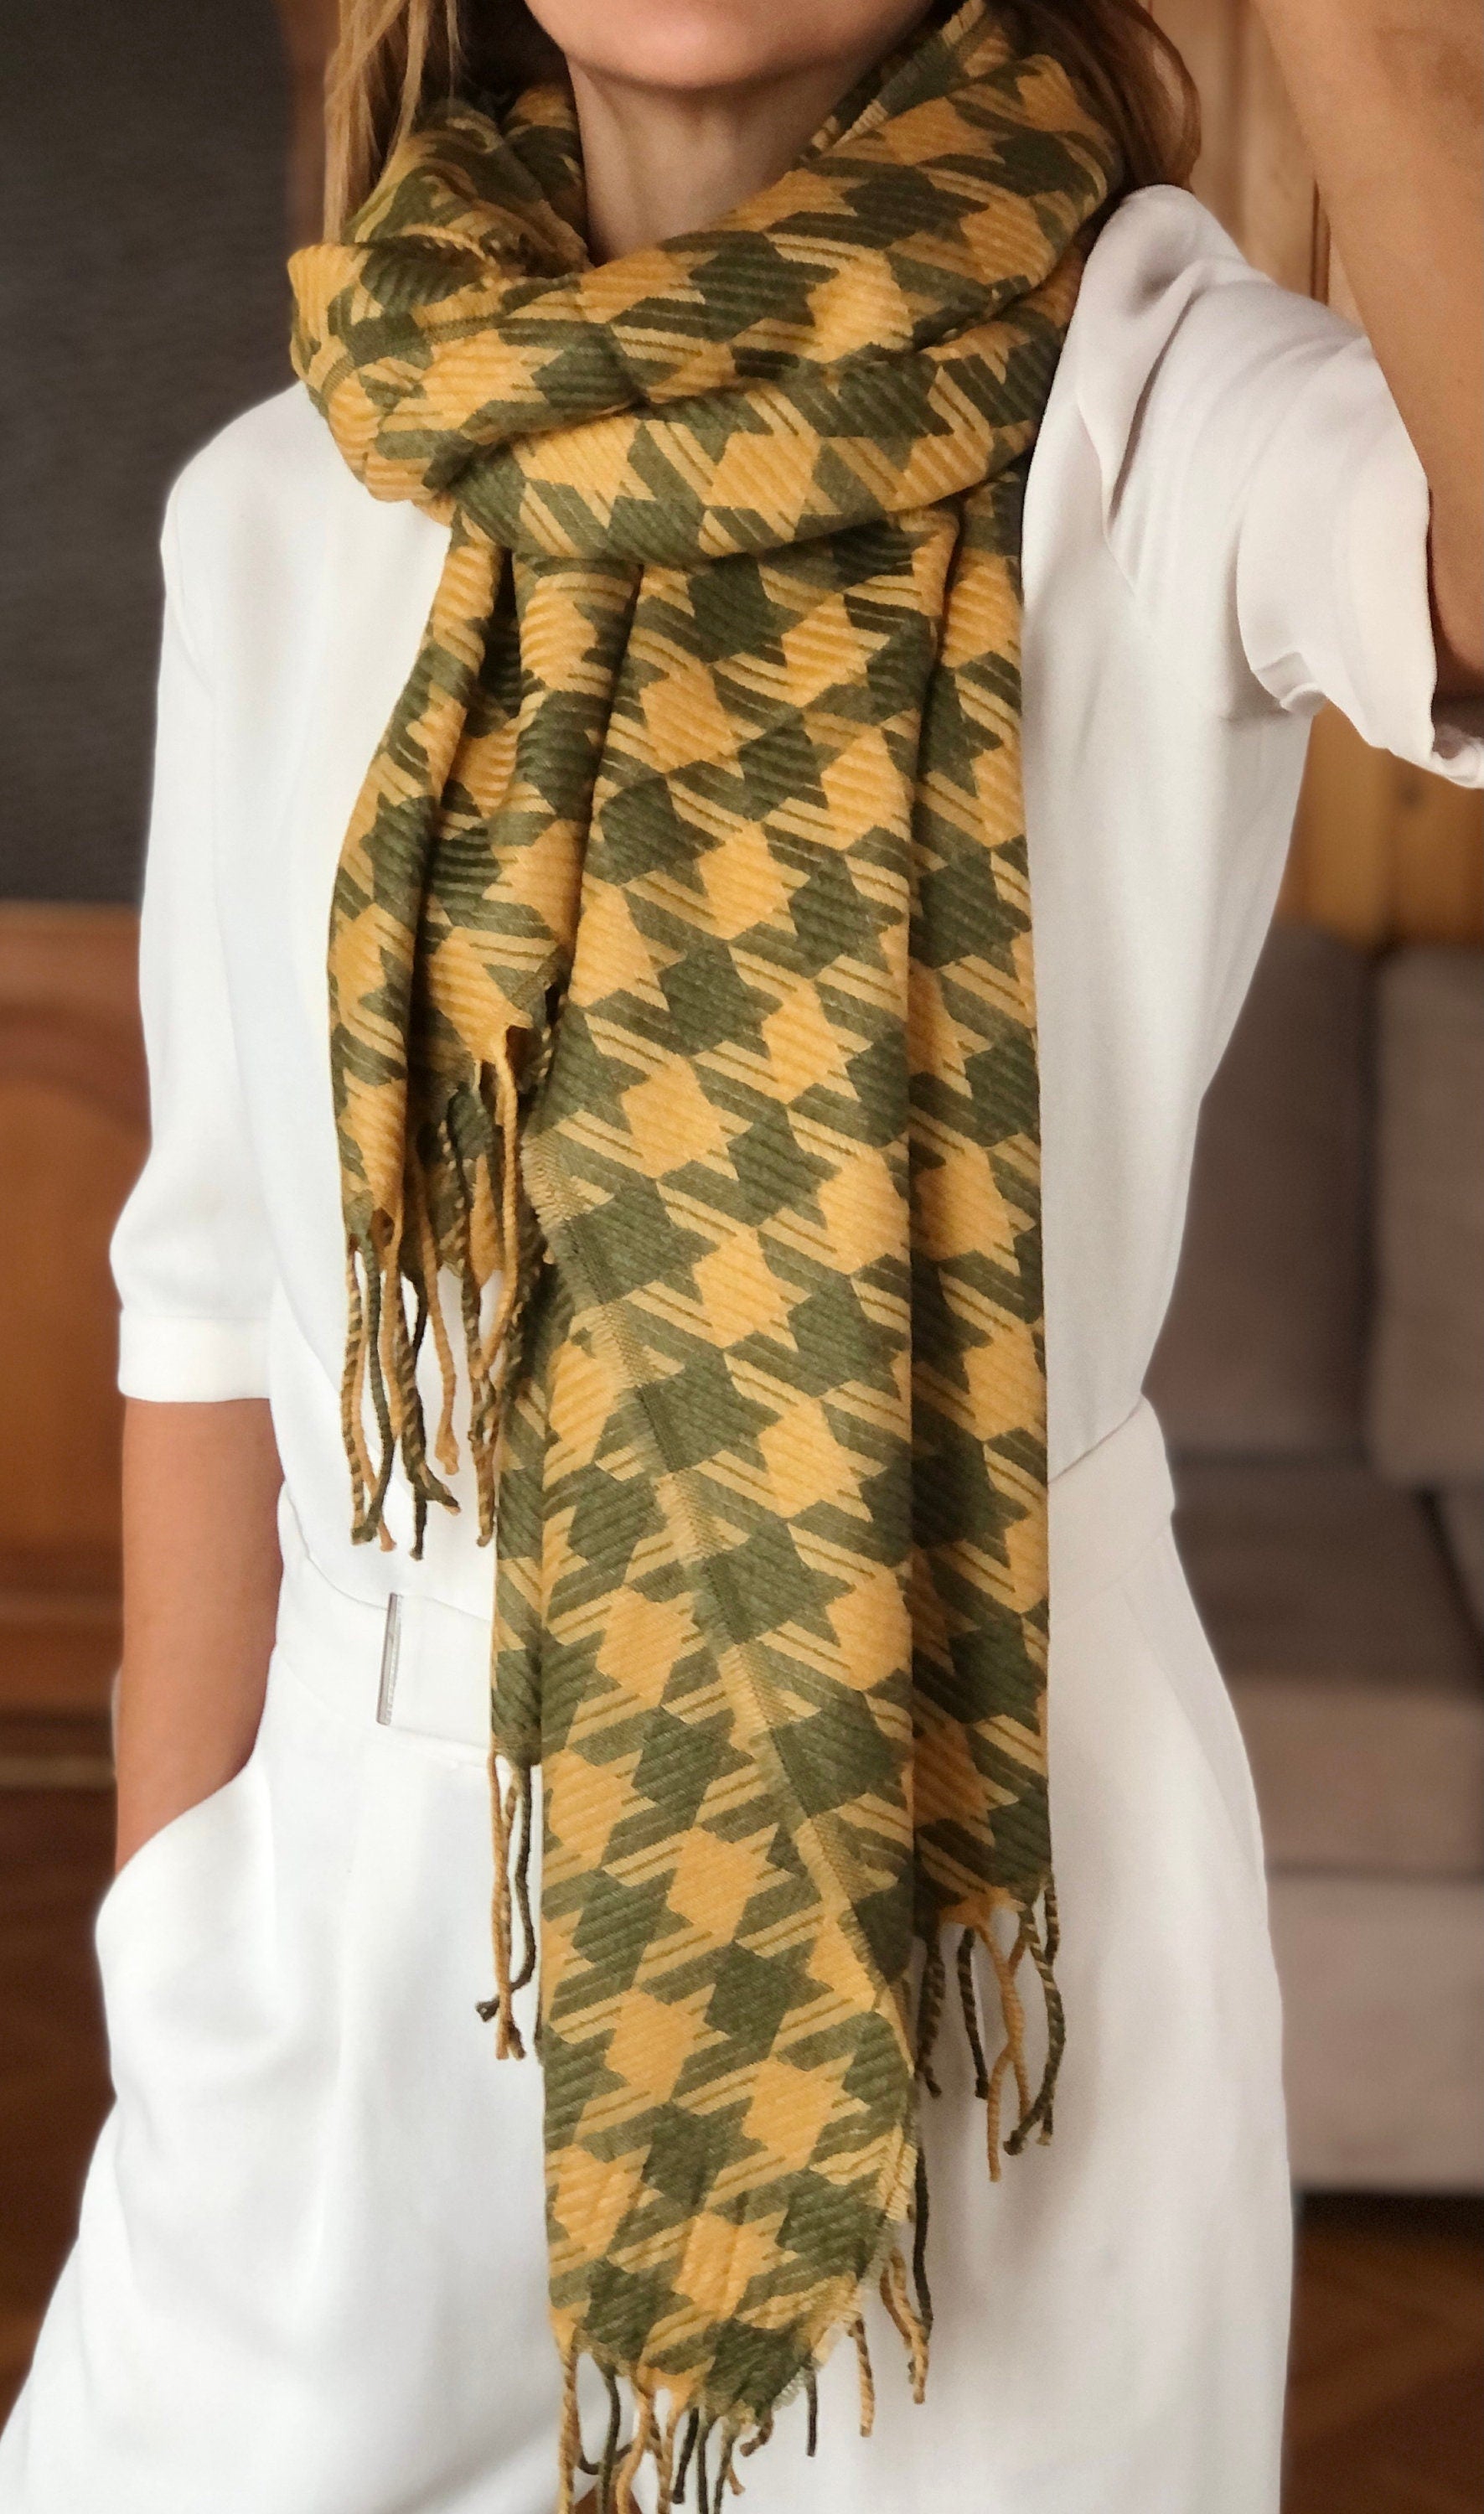 Stay warm and fashionable on your travels with this comfortable and stylish shawl.